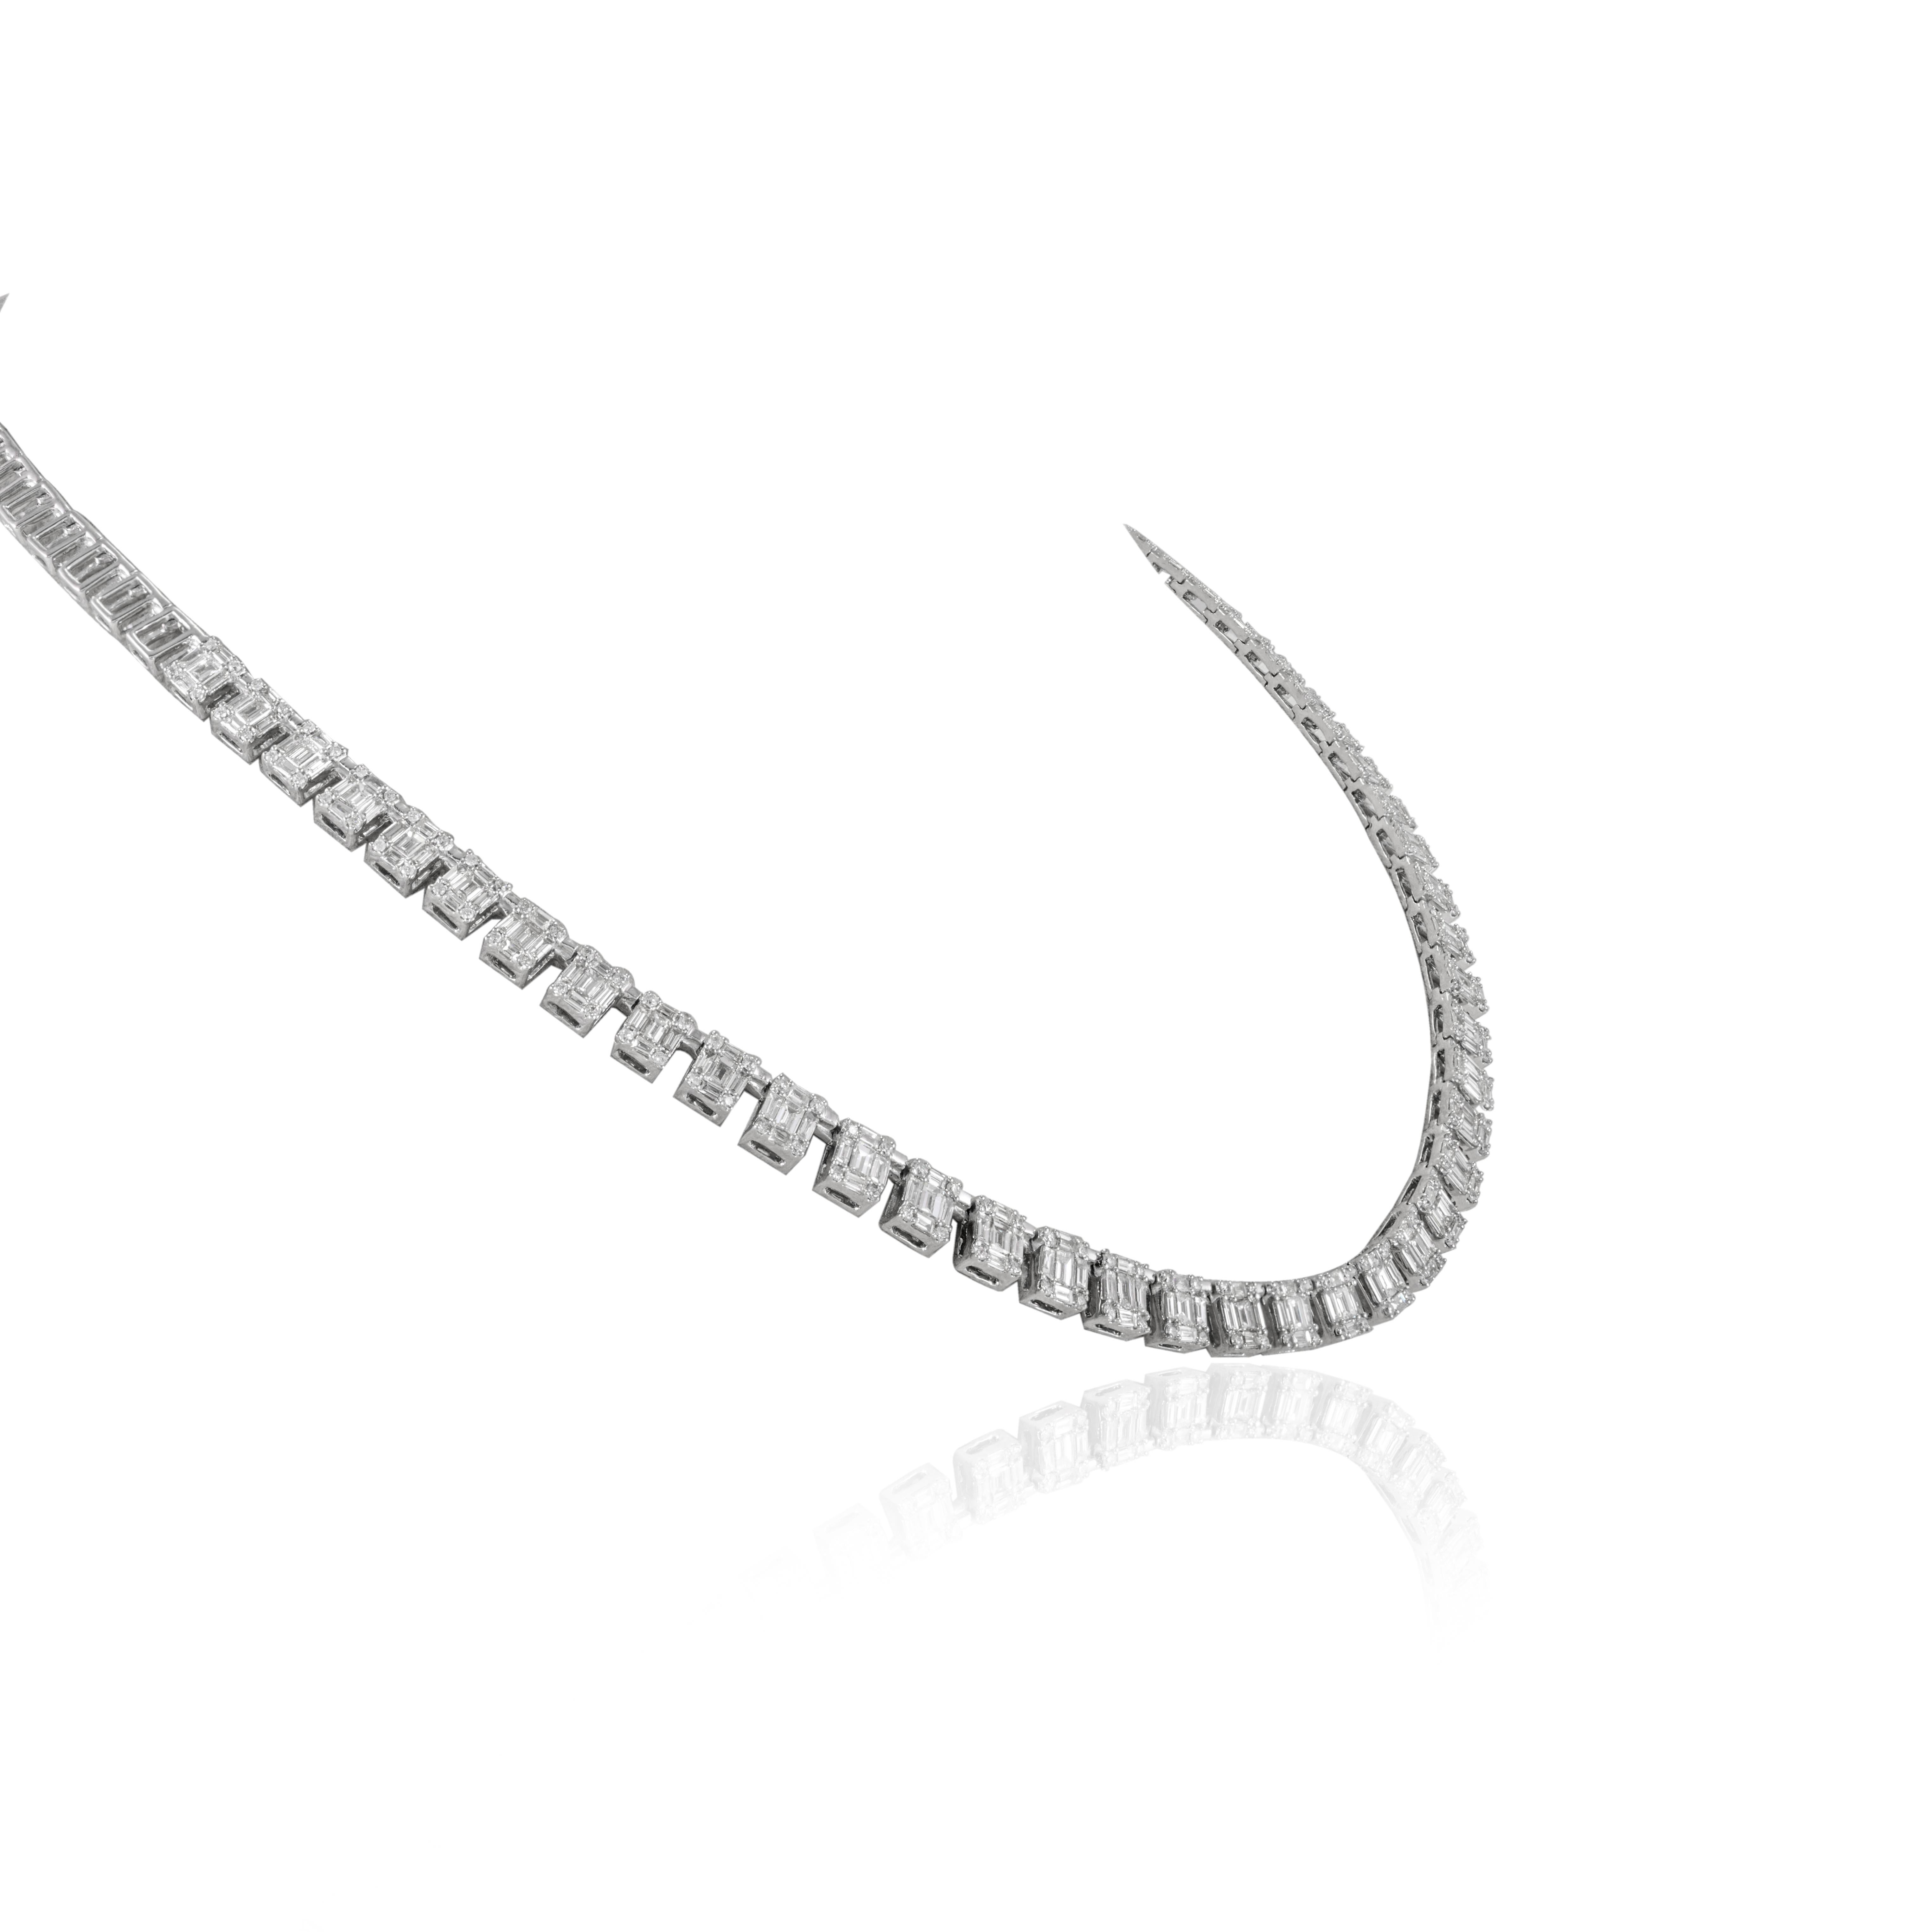 Emerald Cut Illusion Set Diamond Tennis Necklace studded in 18K Gold. This stunning piece of jewelry instantly elevates a casual look or dressy outfit. 
April birthstone diamond brings love, fame, success and prosperity.
Designed with mixed cut